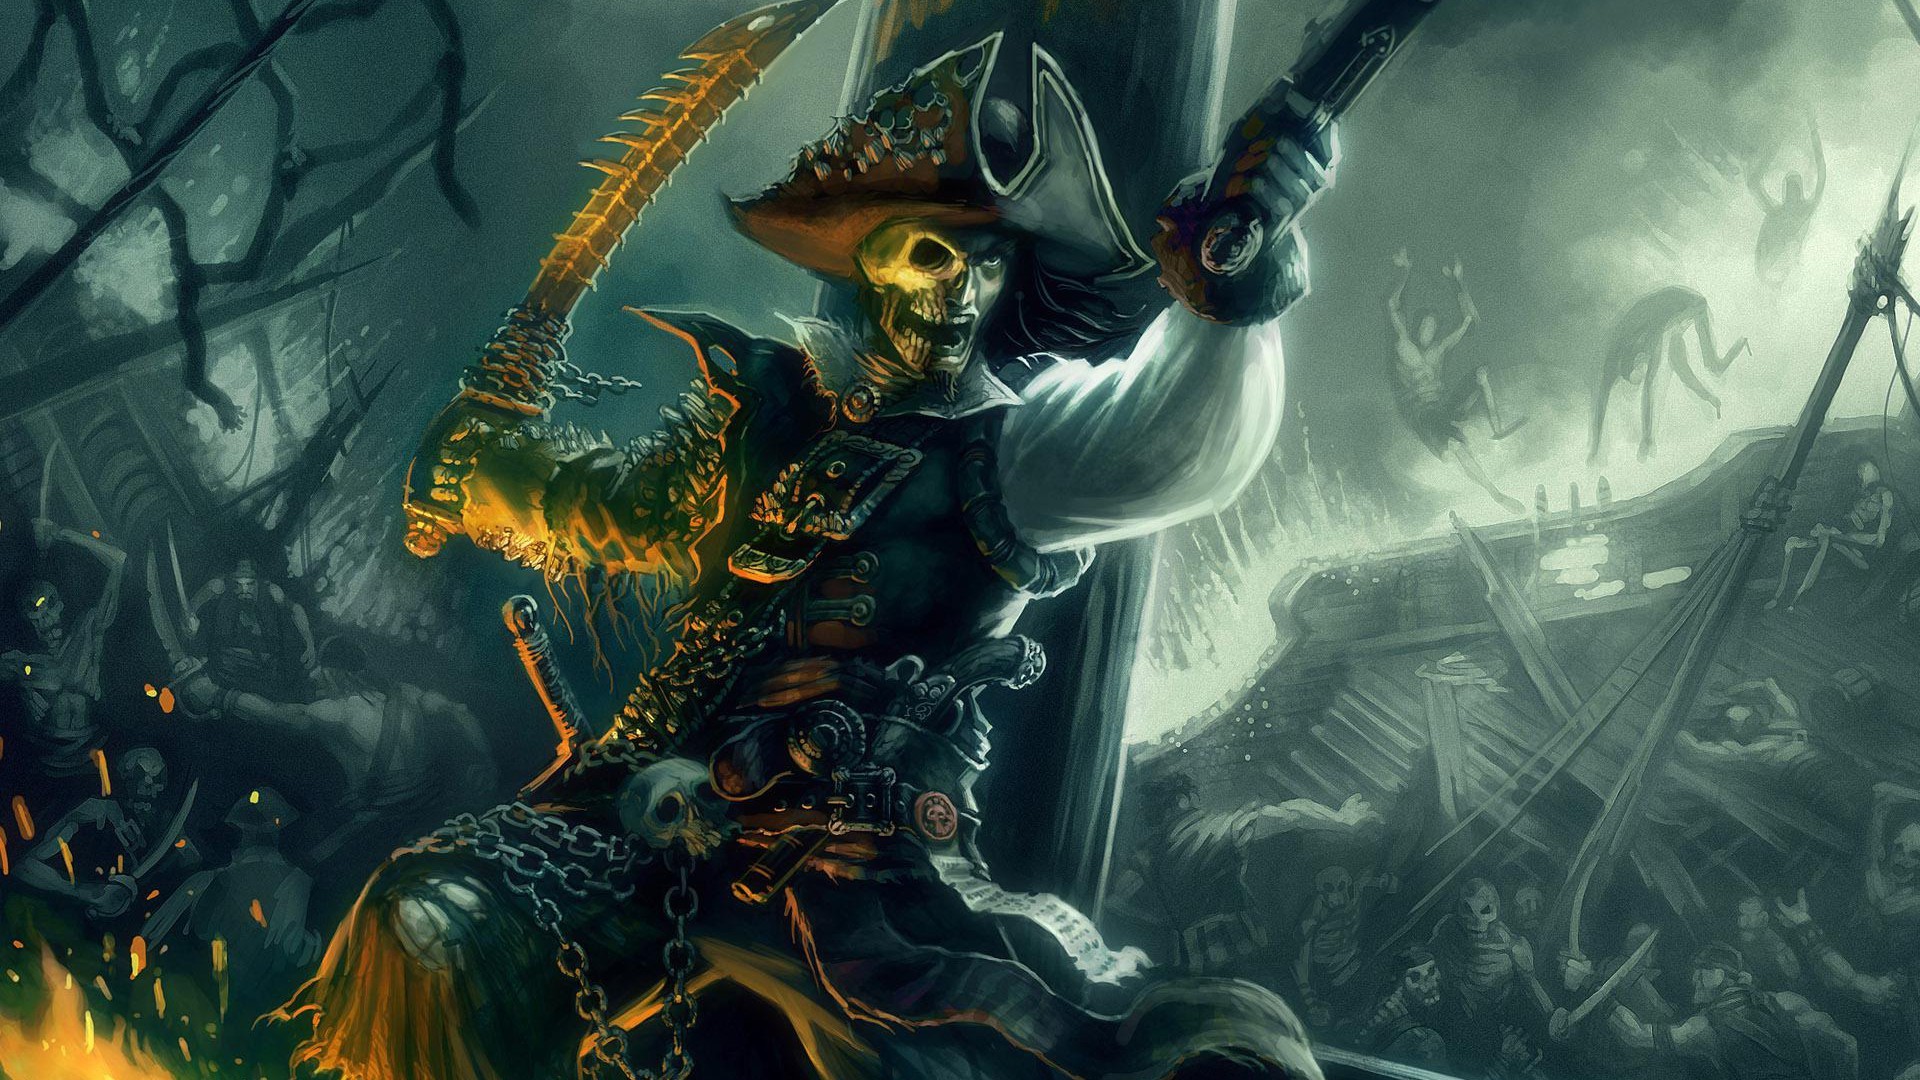 1920x1080 14 HD Pirate Desktop Wallpapers For Free Download